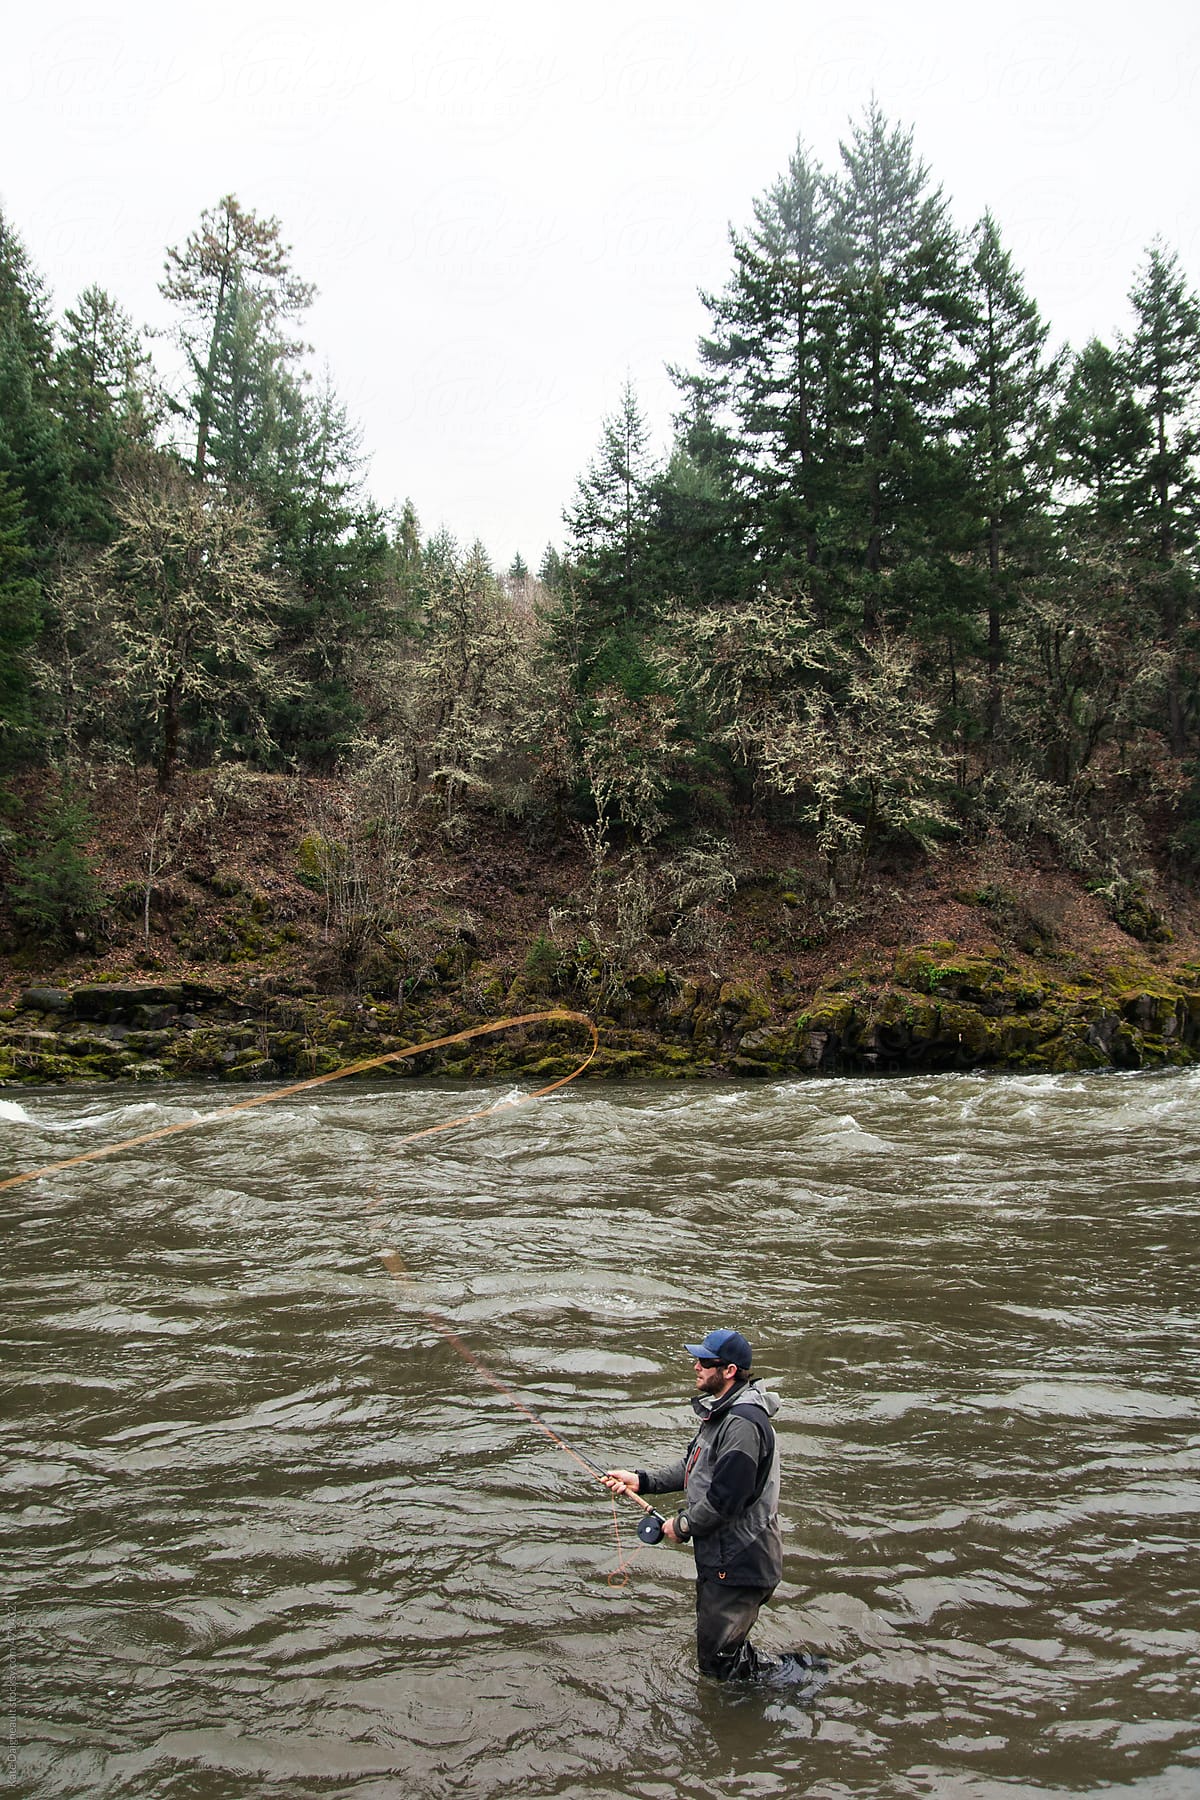 Man stands in the river casting an orange fly fishing line.